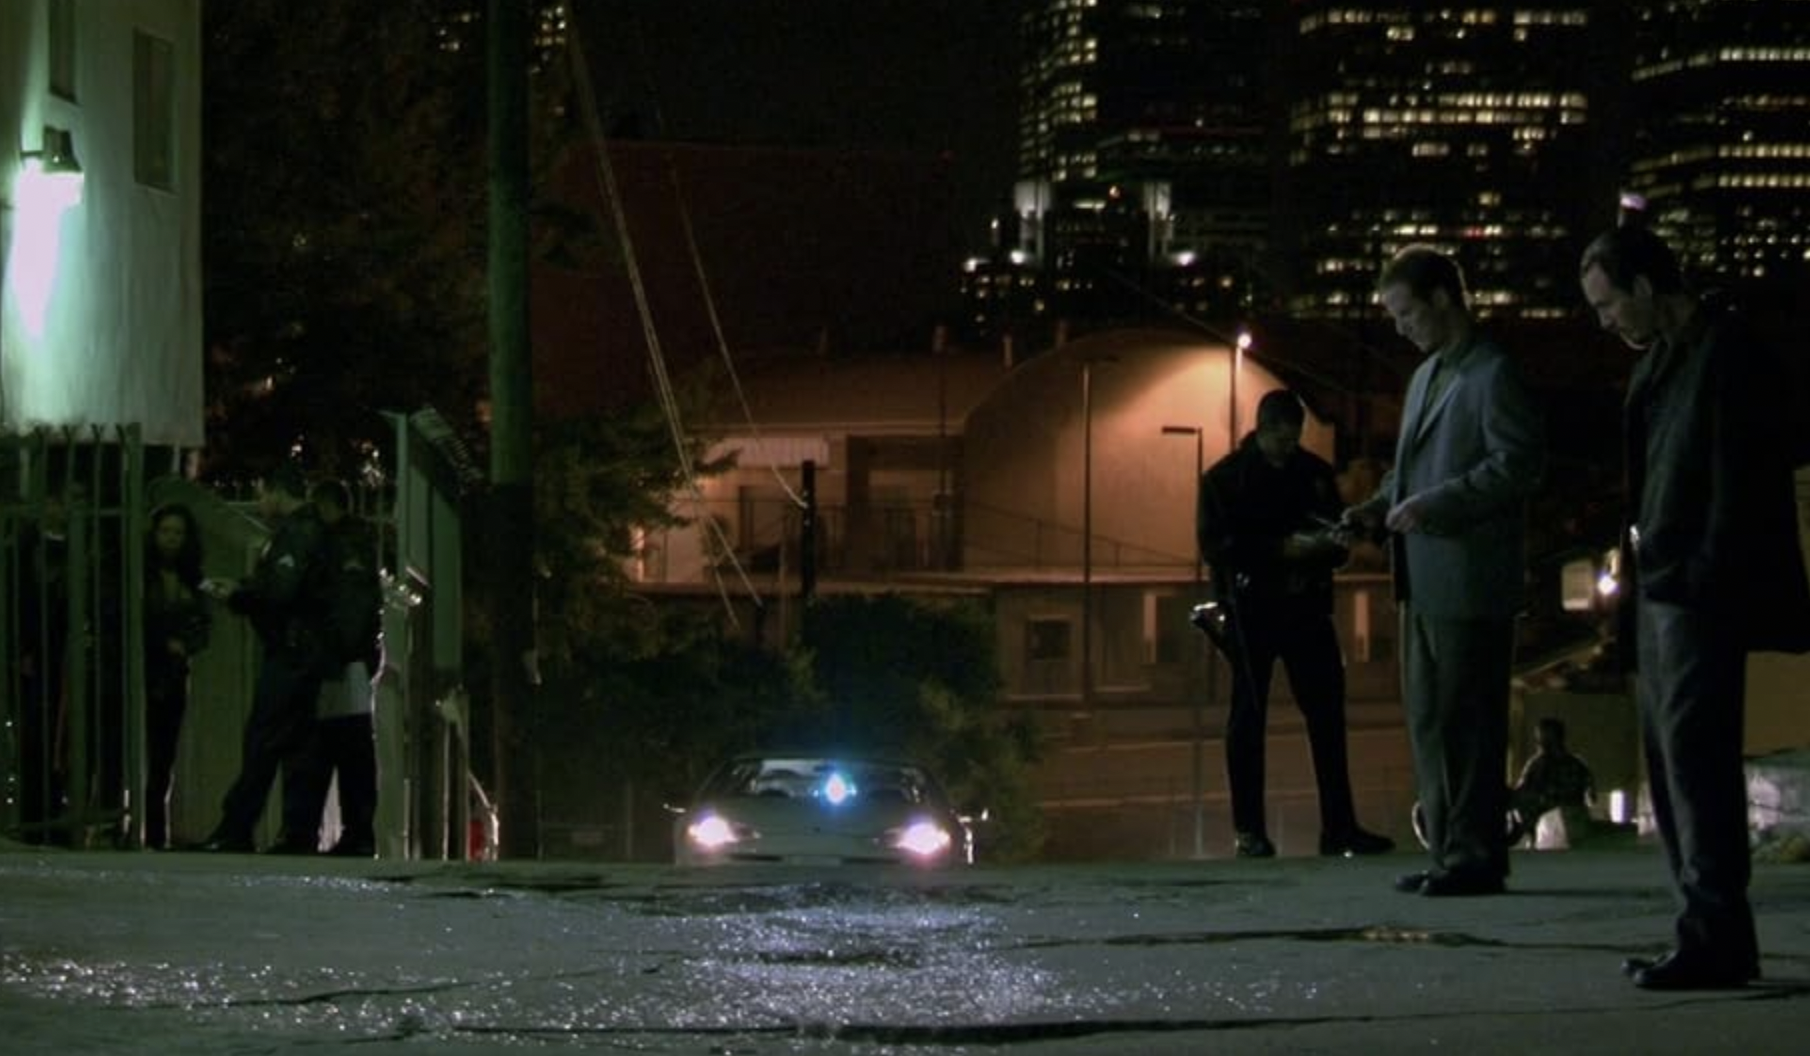 <p>During the filming of 2004's Collateral, Tom Cruise had a close call while shooting a car chase sequence with Jamie Foxx. As Foxx recounted the incident, he thought he had almost killed Cruise when his taxi collided with Cruise's Mercedes head-on. The impact was so powerful that the Mercedes lifted off the ground and veered off the set. Fortunately, Cruise emerged from the accident unharmed, attributing his minor injuries to being tossed around inside the vehicle. While Cruise's sprinting scenes have become iconic in his action films, this particular car chase mishap served as a reminder of the risks involved in filming intense sequences.</p>